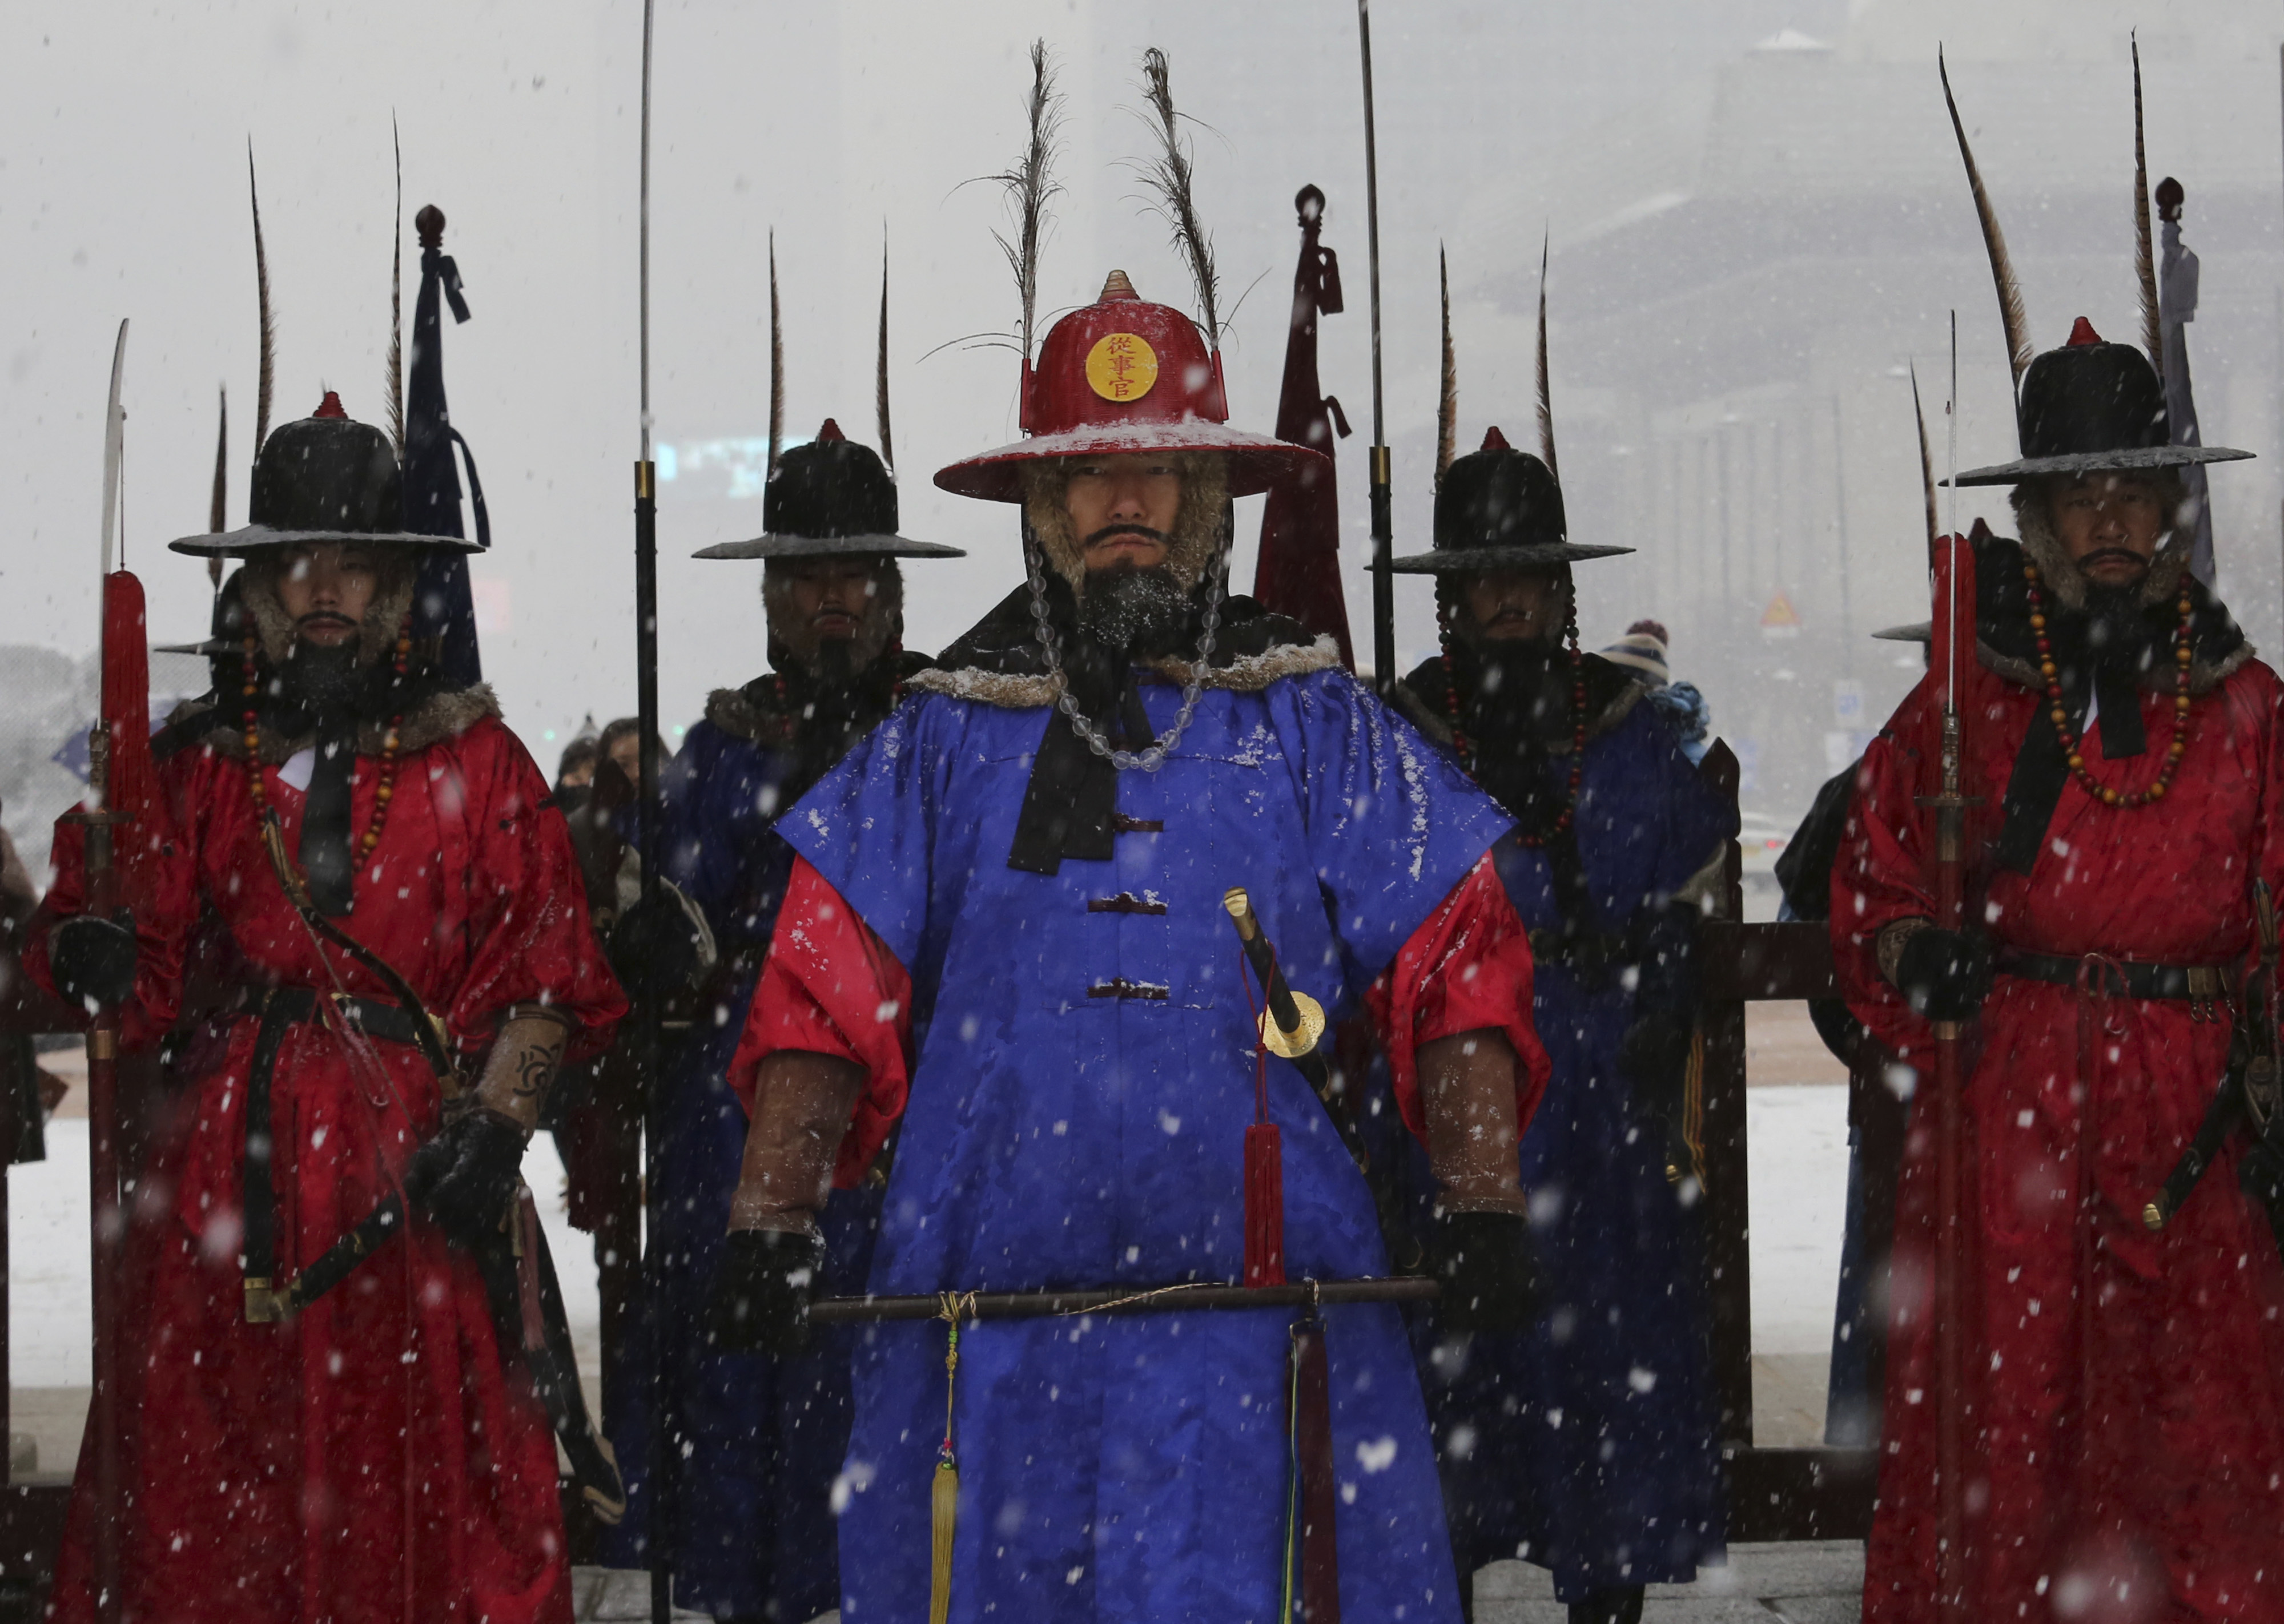 Palace guards wearing traditional military uniforms stand during snowfall at the Gyeongbok Palace, the main royal palace during the Joseon Dynasty, and one of South Korea's well known landmarks in Seoul, South Korea, Thursday, Dec. 13, 2018. (AP Photo/Ahn Young-joon)